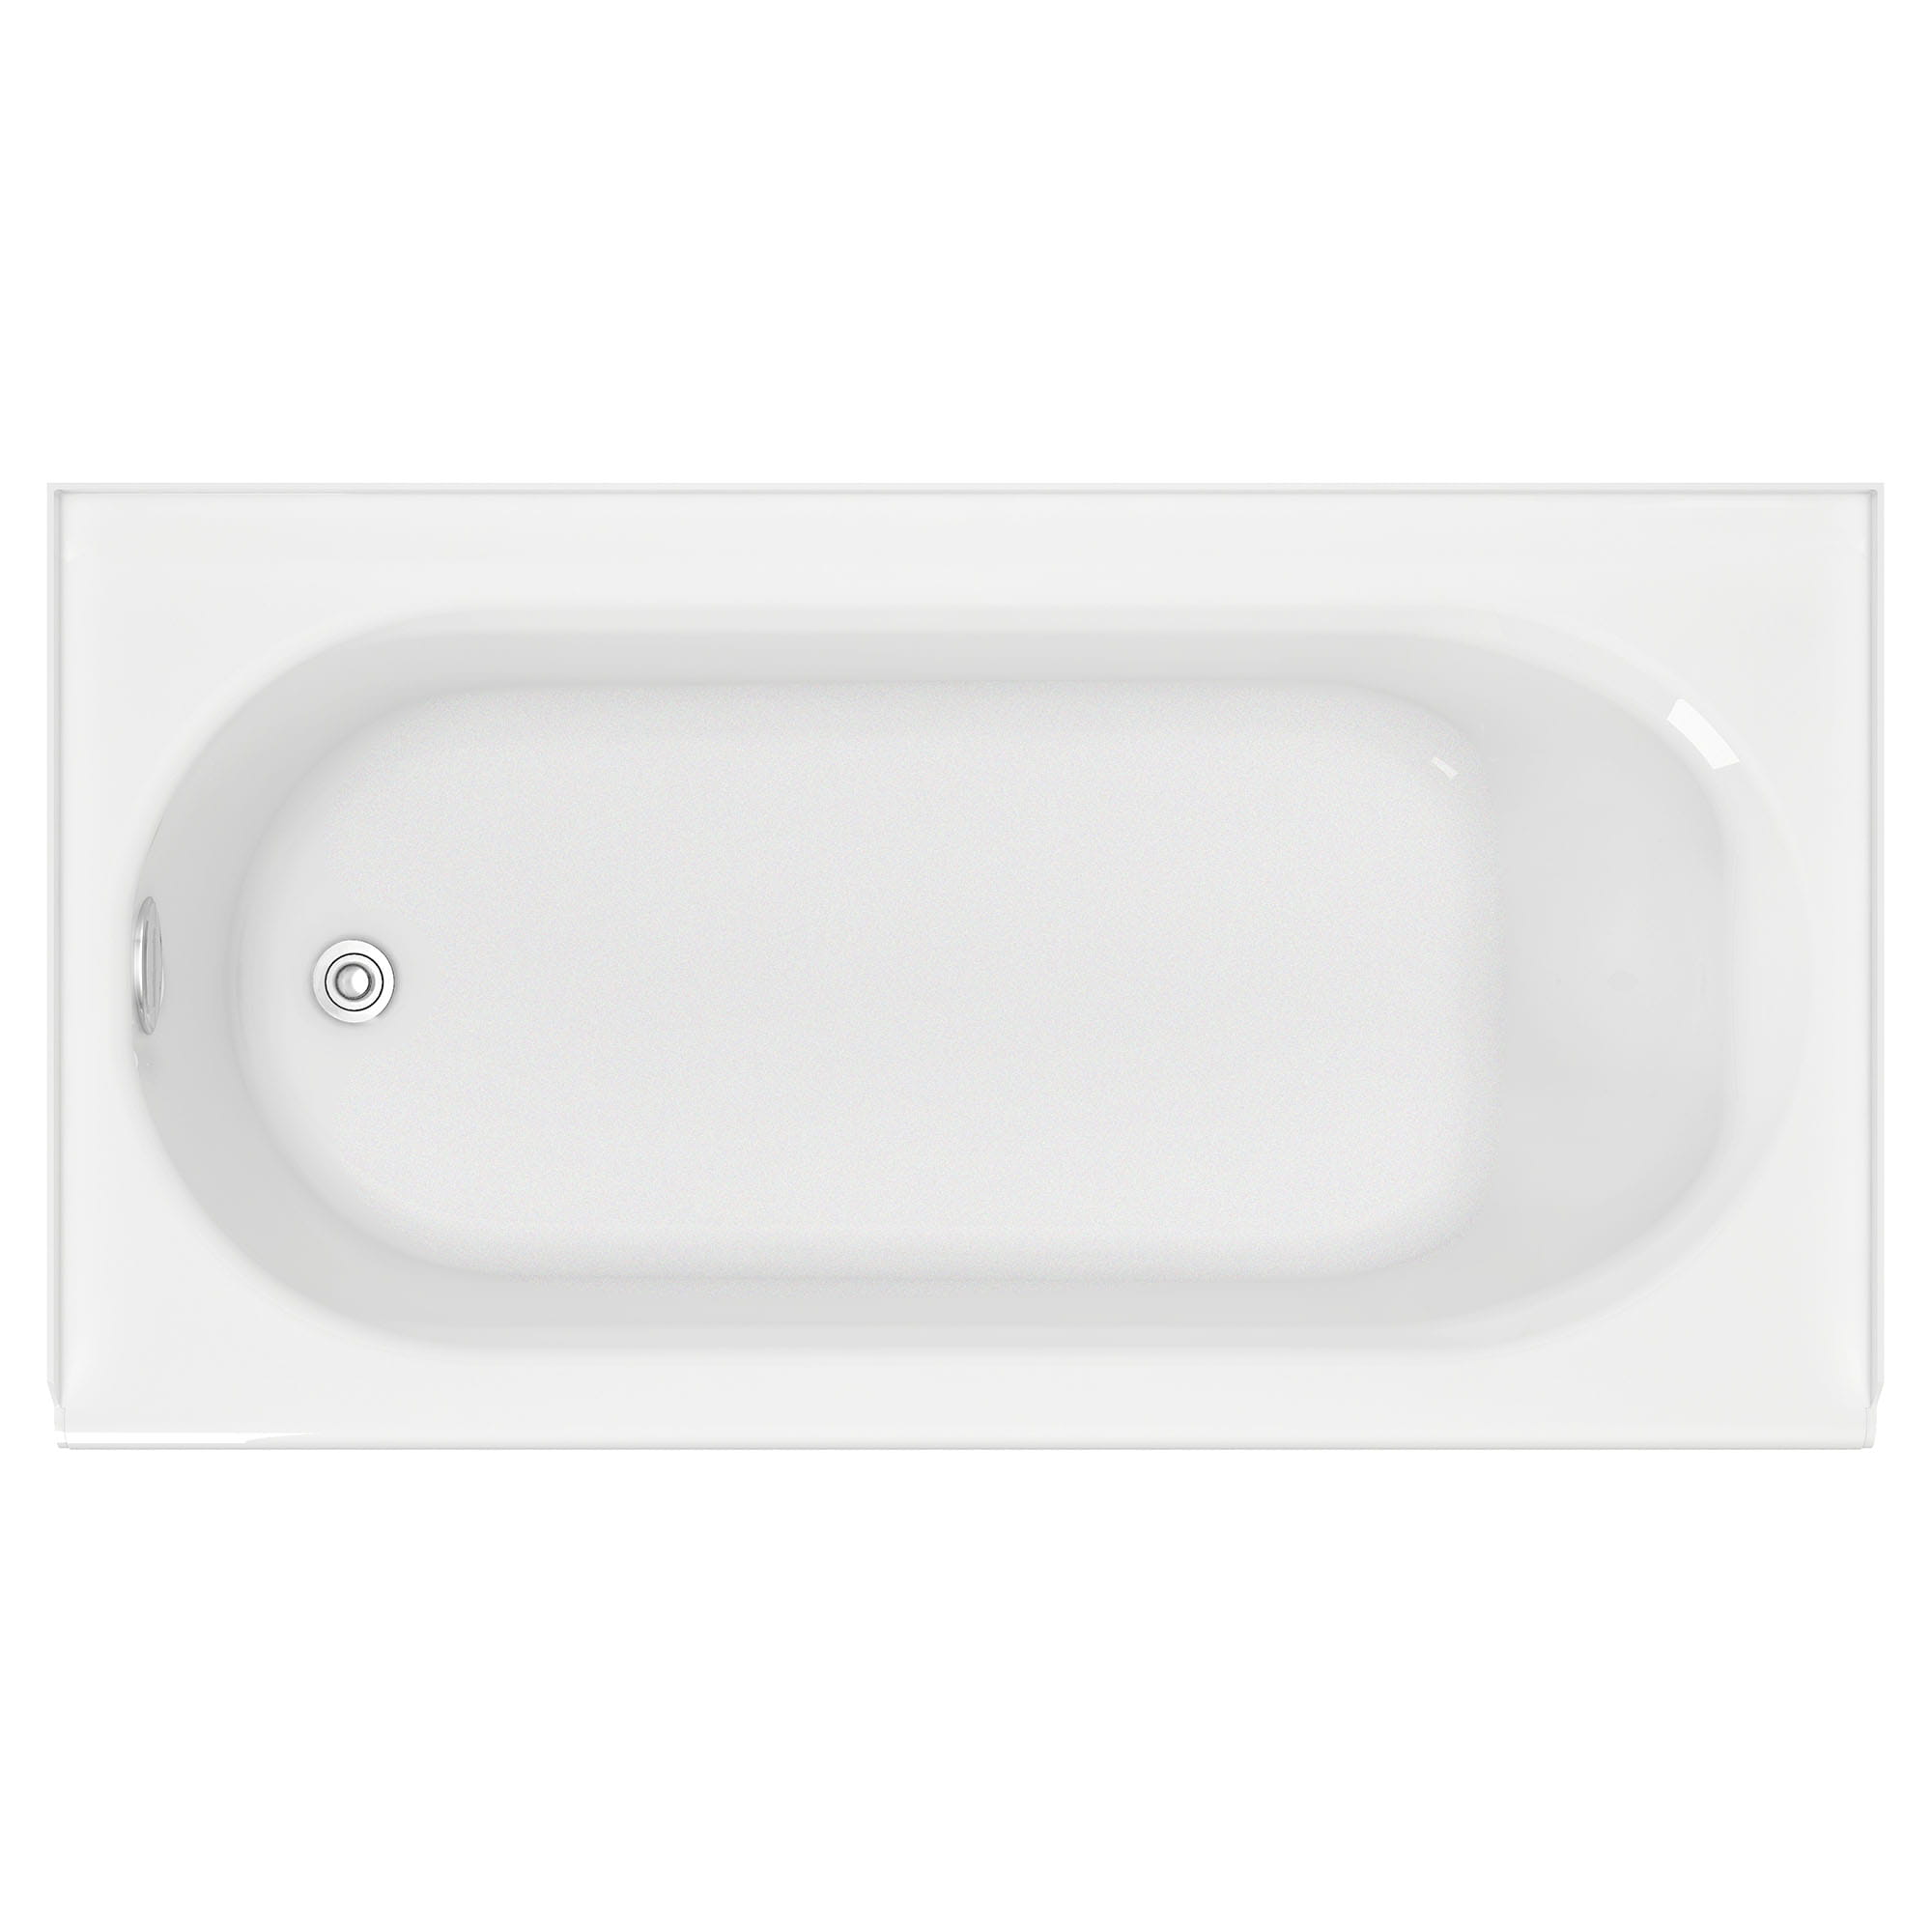 Princeton Americast 60 x 34 Inch Integral Apron Bathtub Left Hand Outlet Luxury Ledge with Integral Drain WHITE